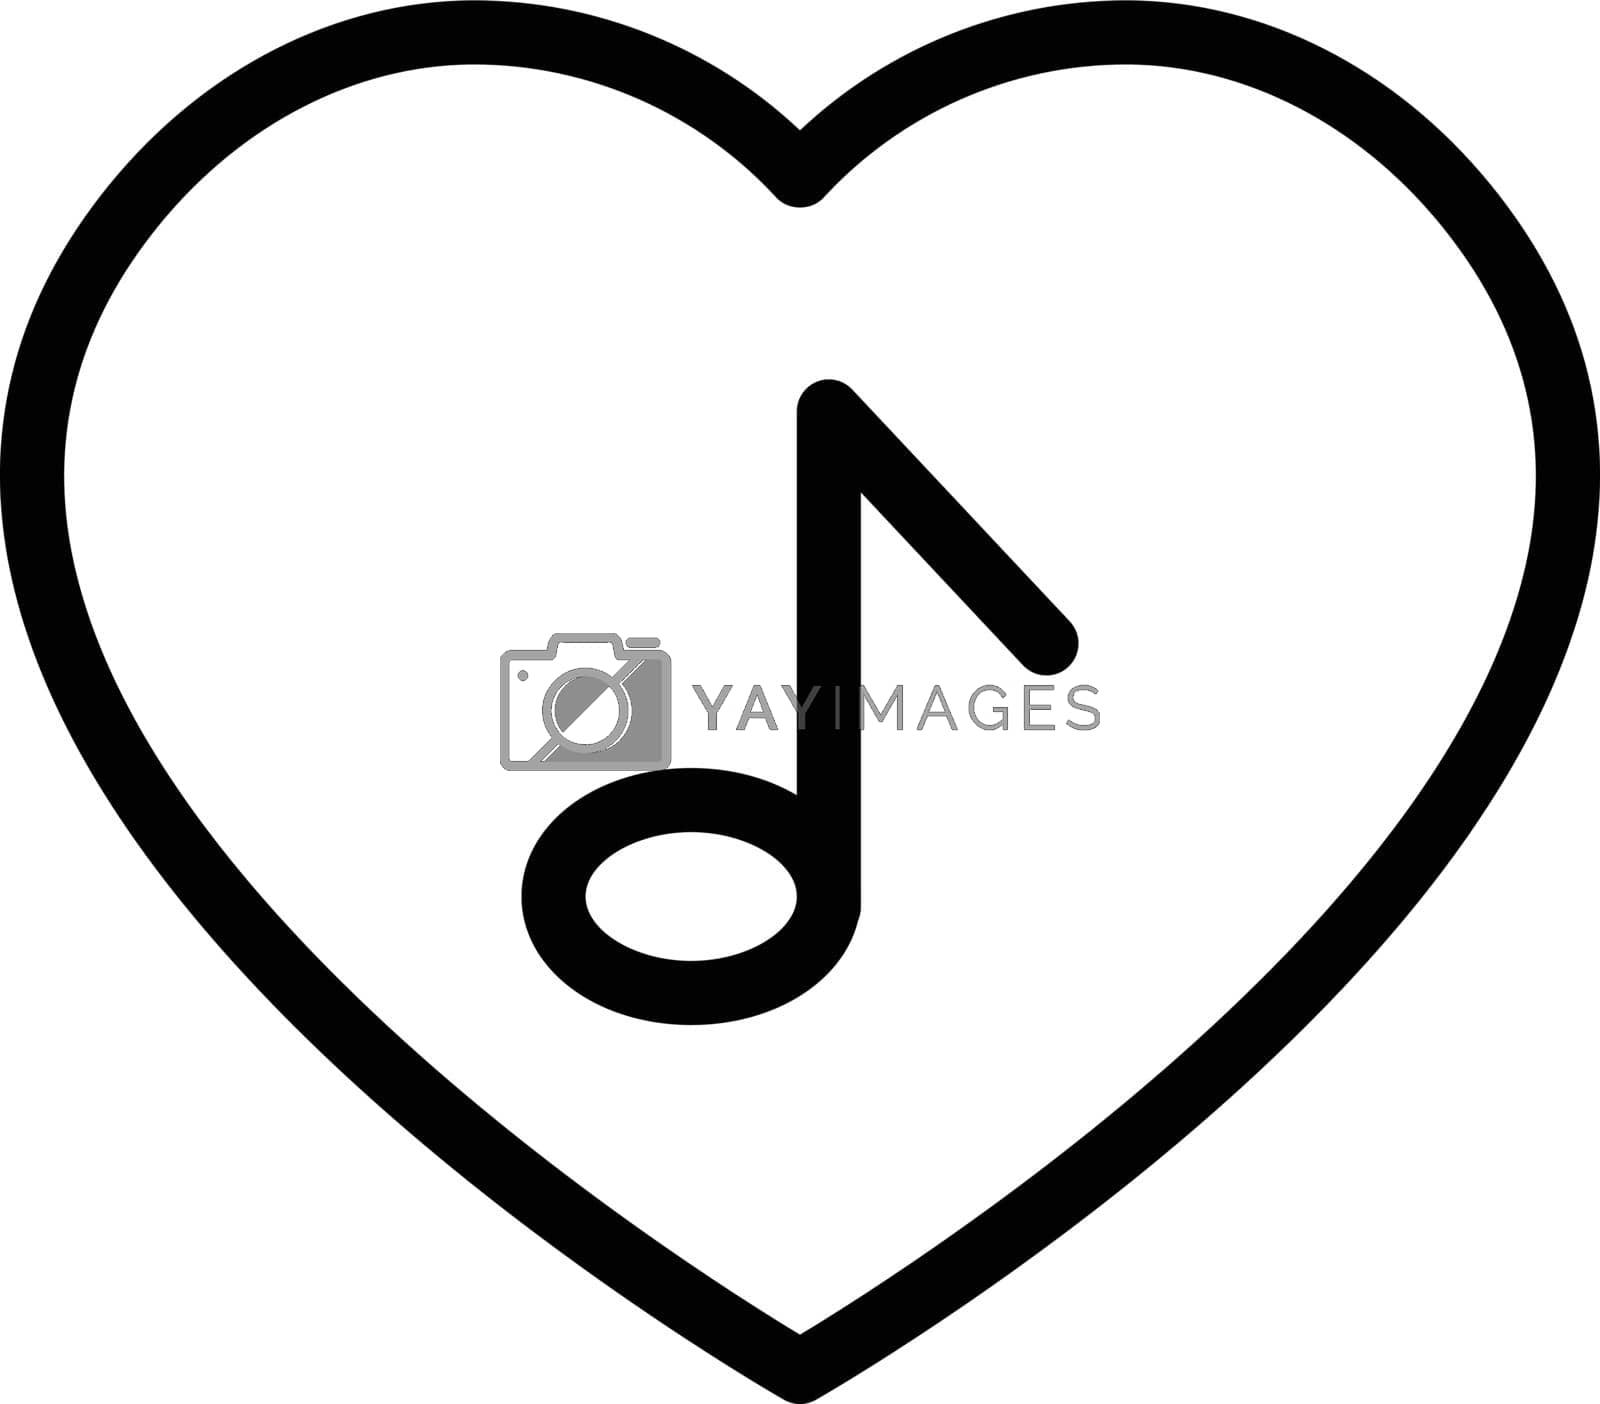 Royalty free image of music by FlaticonsDesign